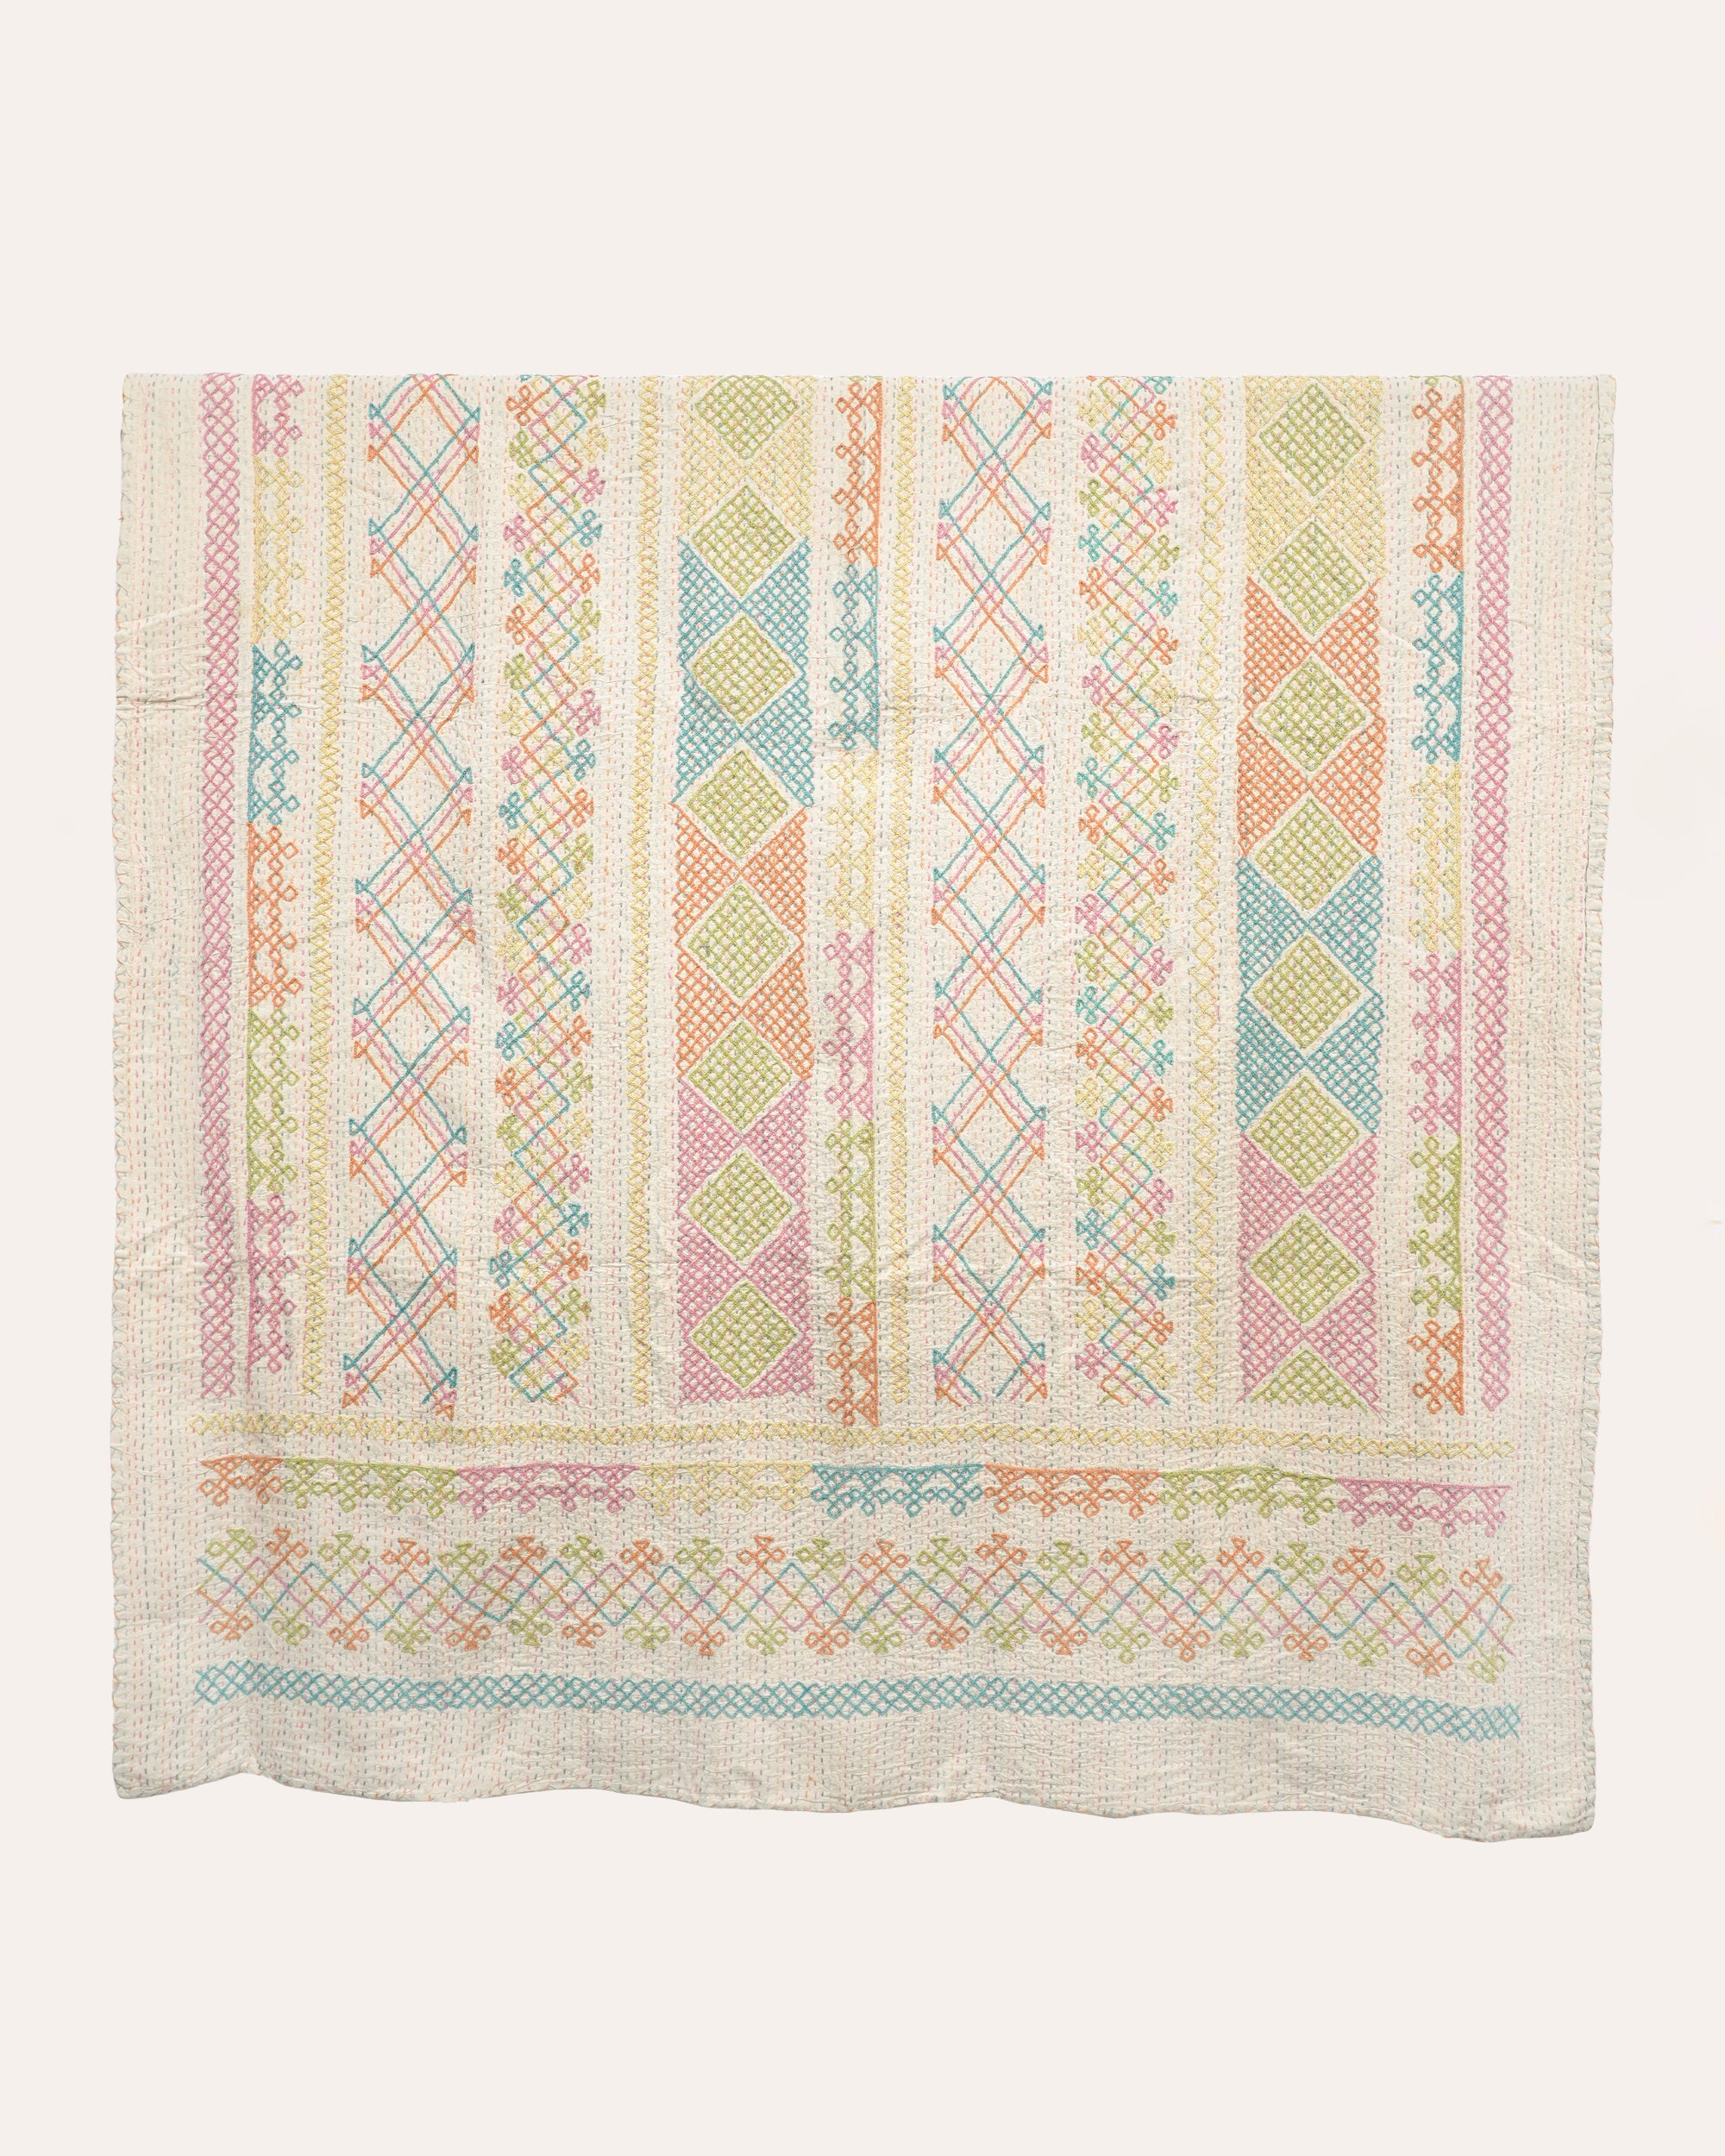 Limited Edition Multi Coloured Kantha Throw V